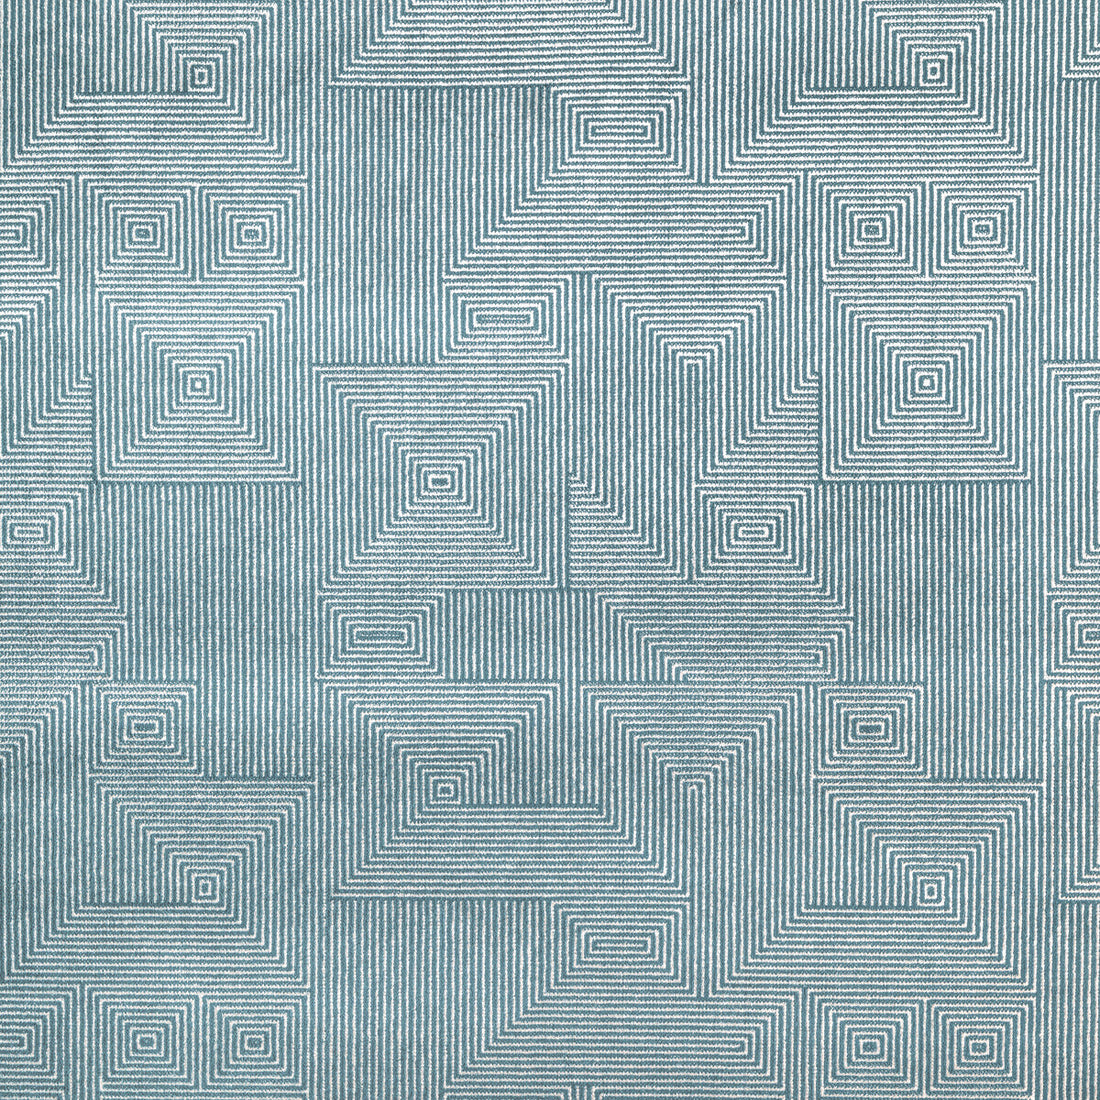 New Order fabric in steel blue color - pattern 36043.511.0 - by Kravet Contract